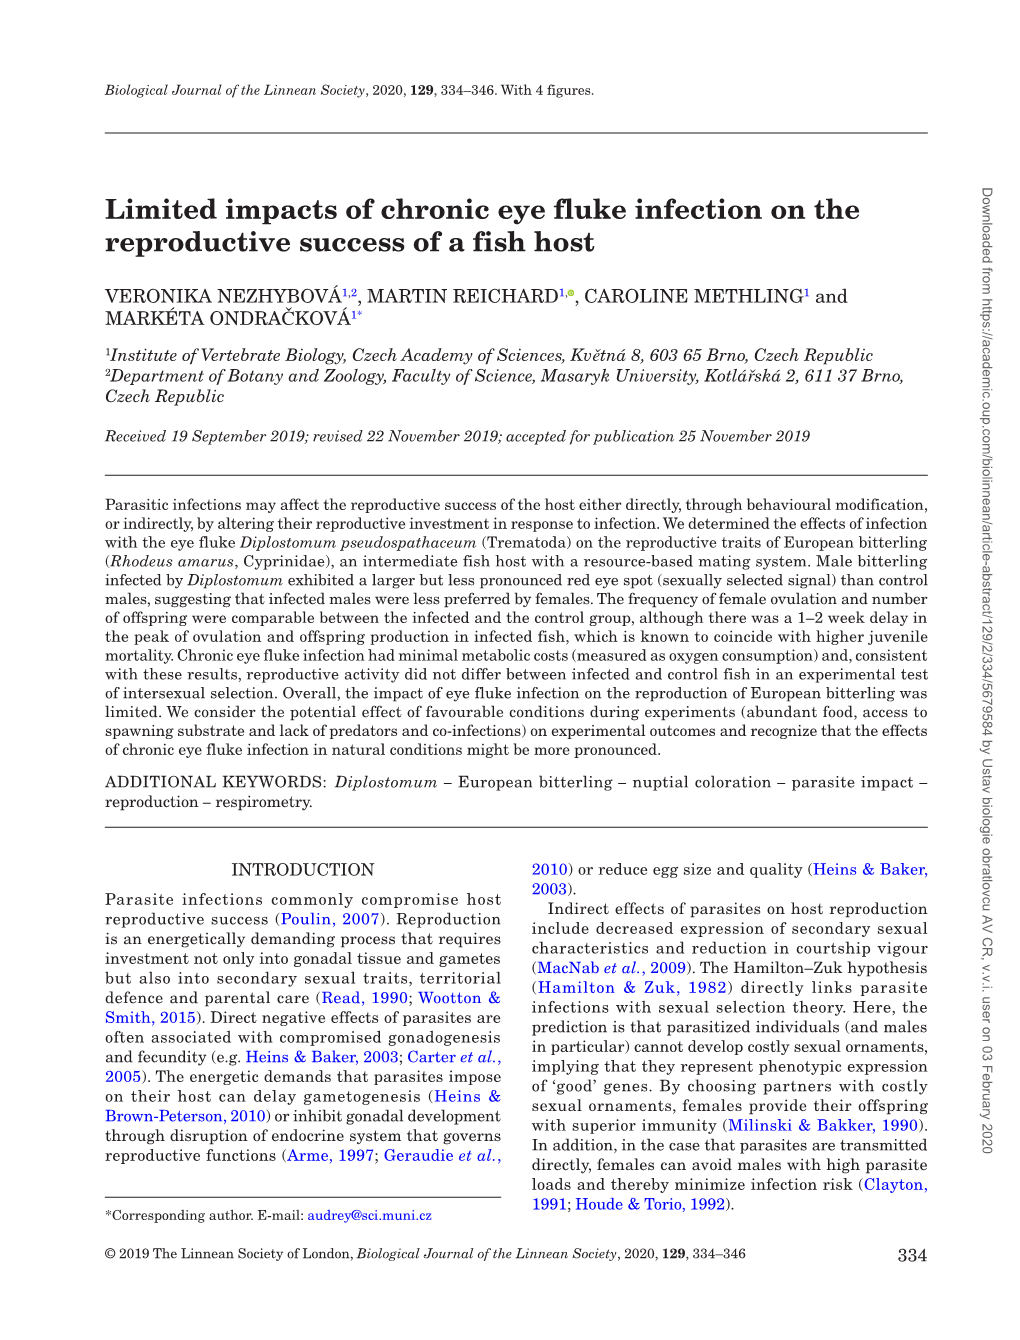 Limited Impacts of Chronic Eye Fluke Infection on the Reproductive Success of a Fish Host